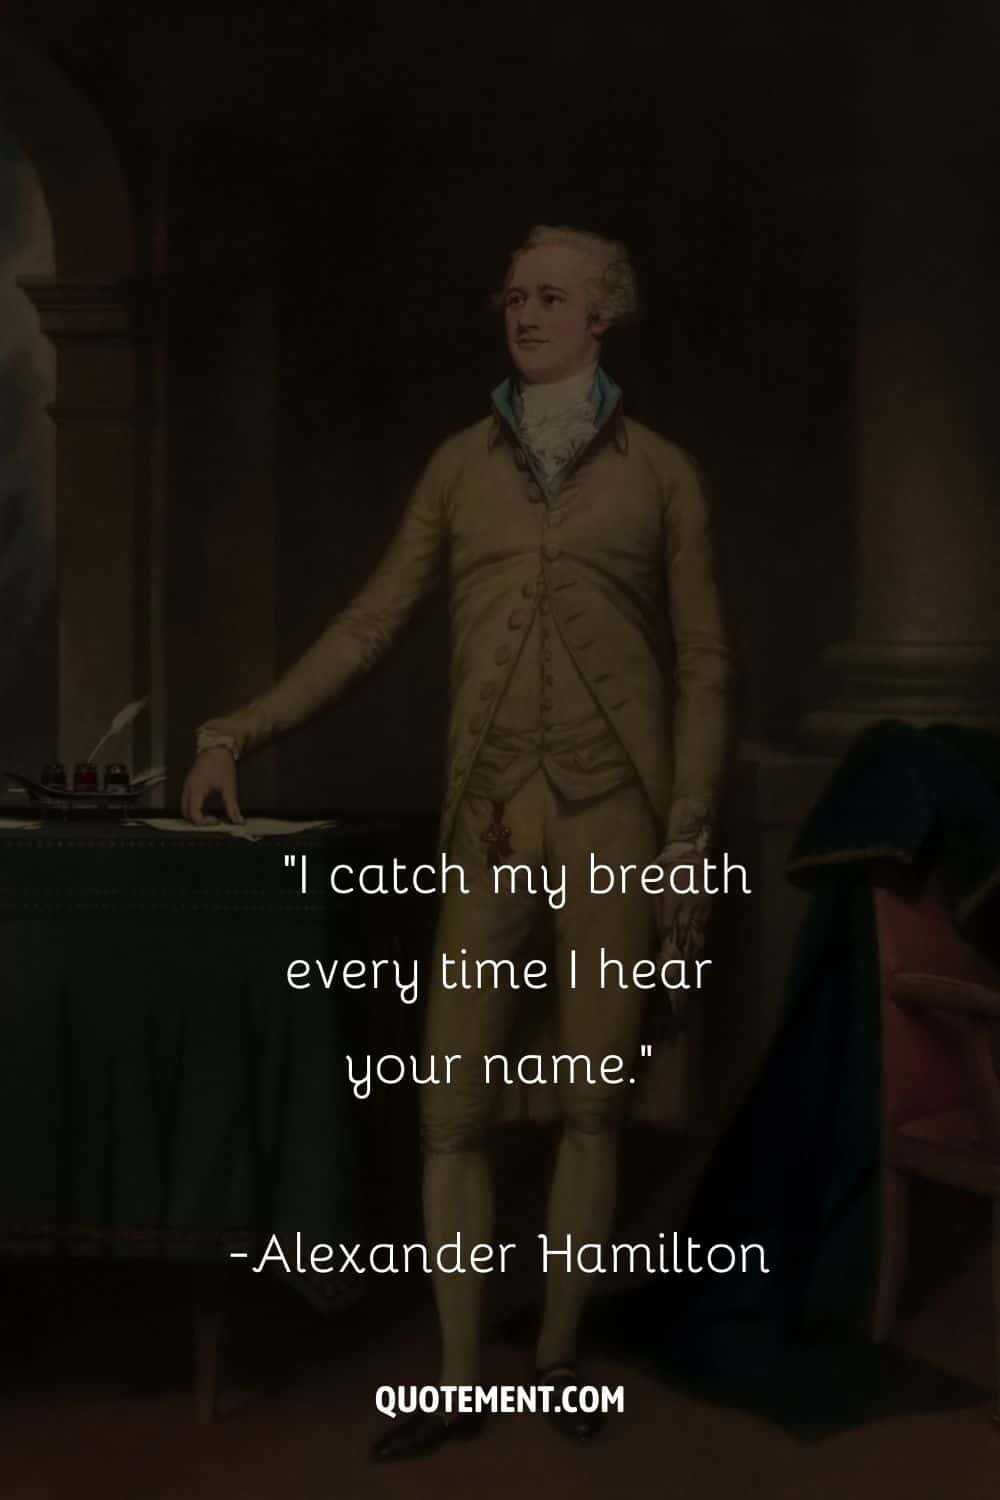 a medieval high class man representing famous hamilton quote
